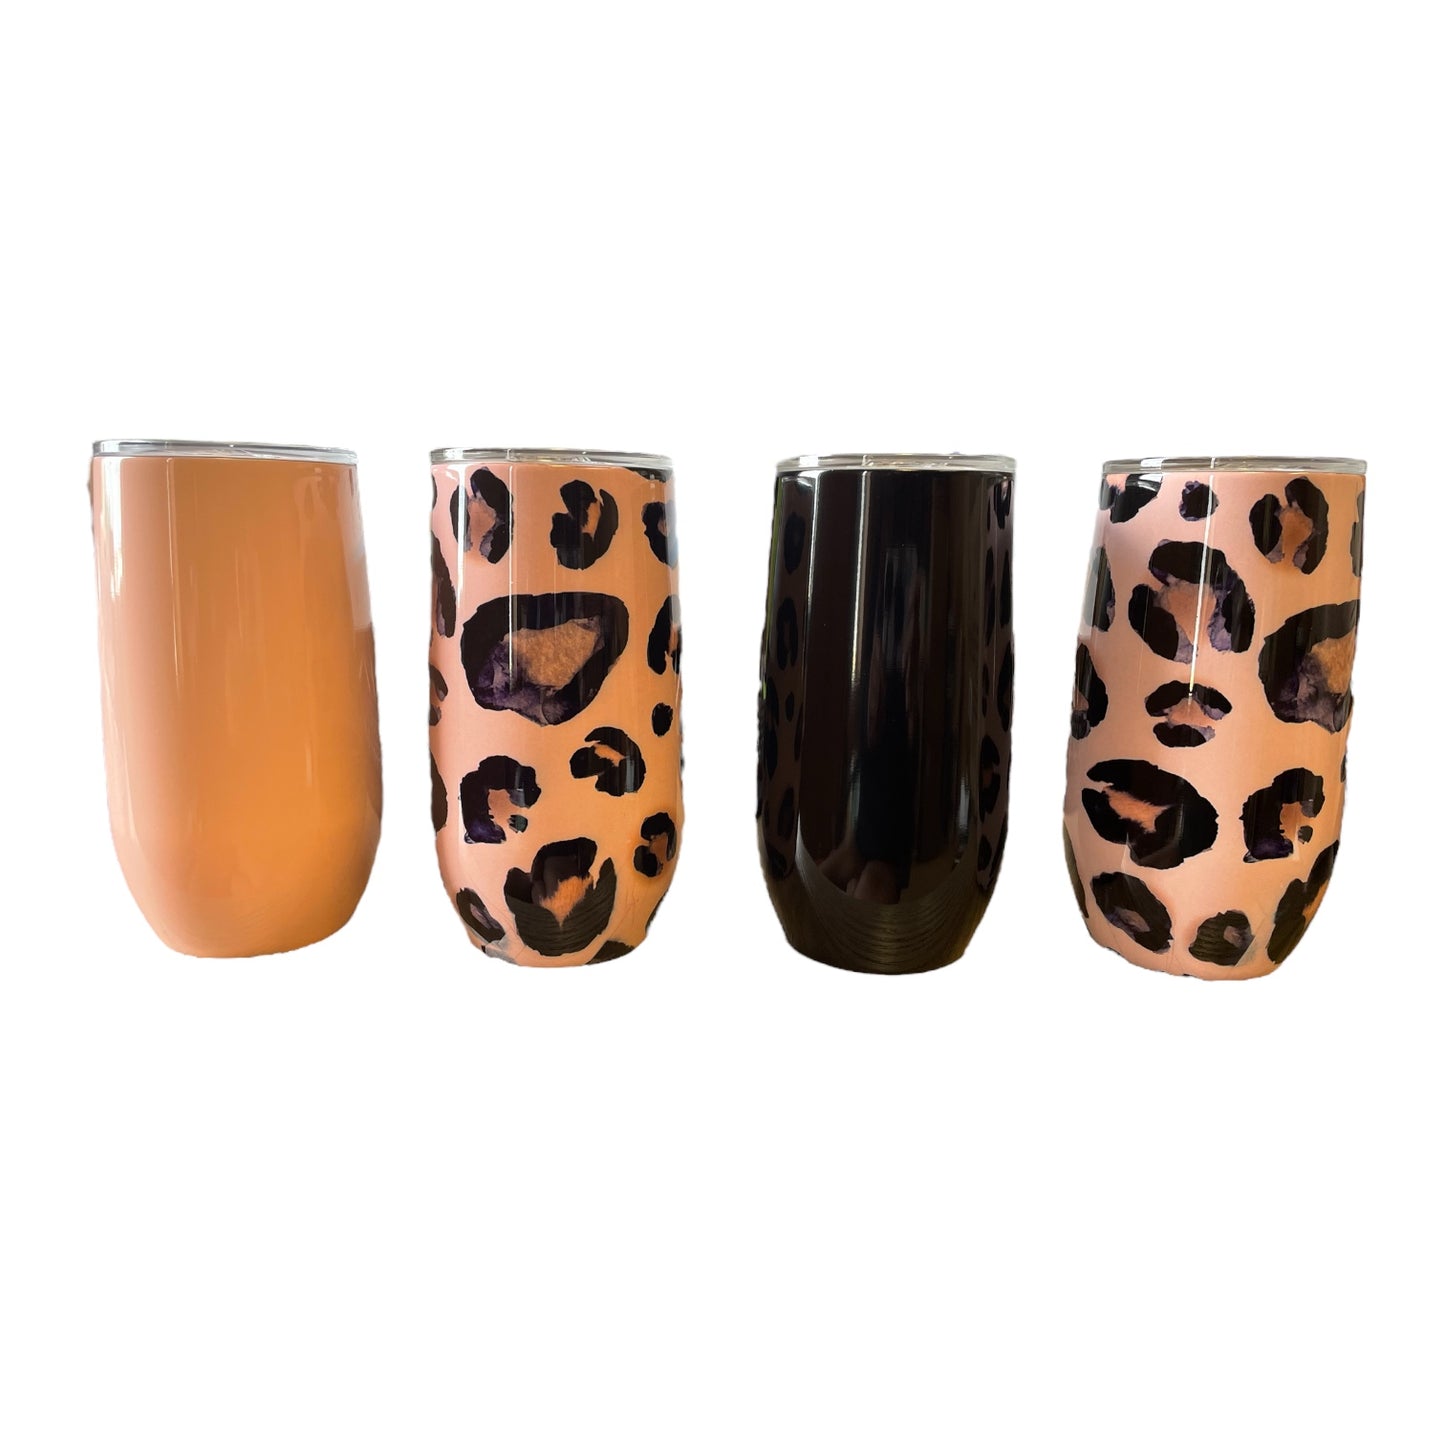 4 Pk Member's Mark Stainless Steel Insulated Flute Tumblers with Lids, Leopard